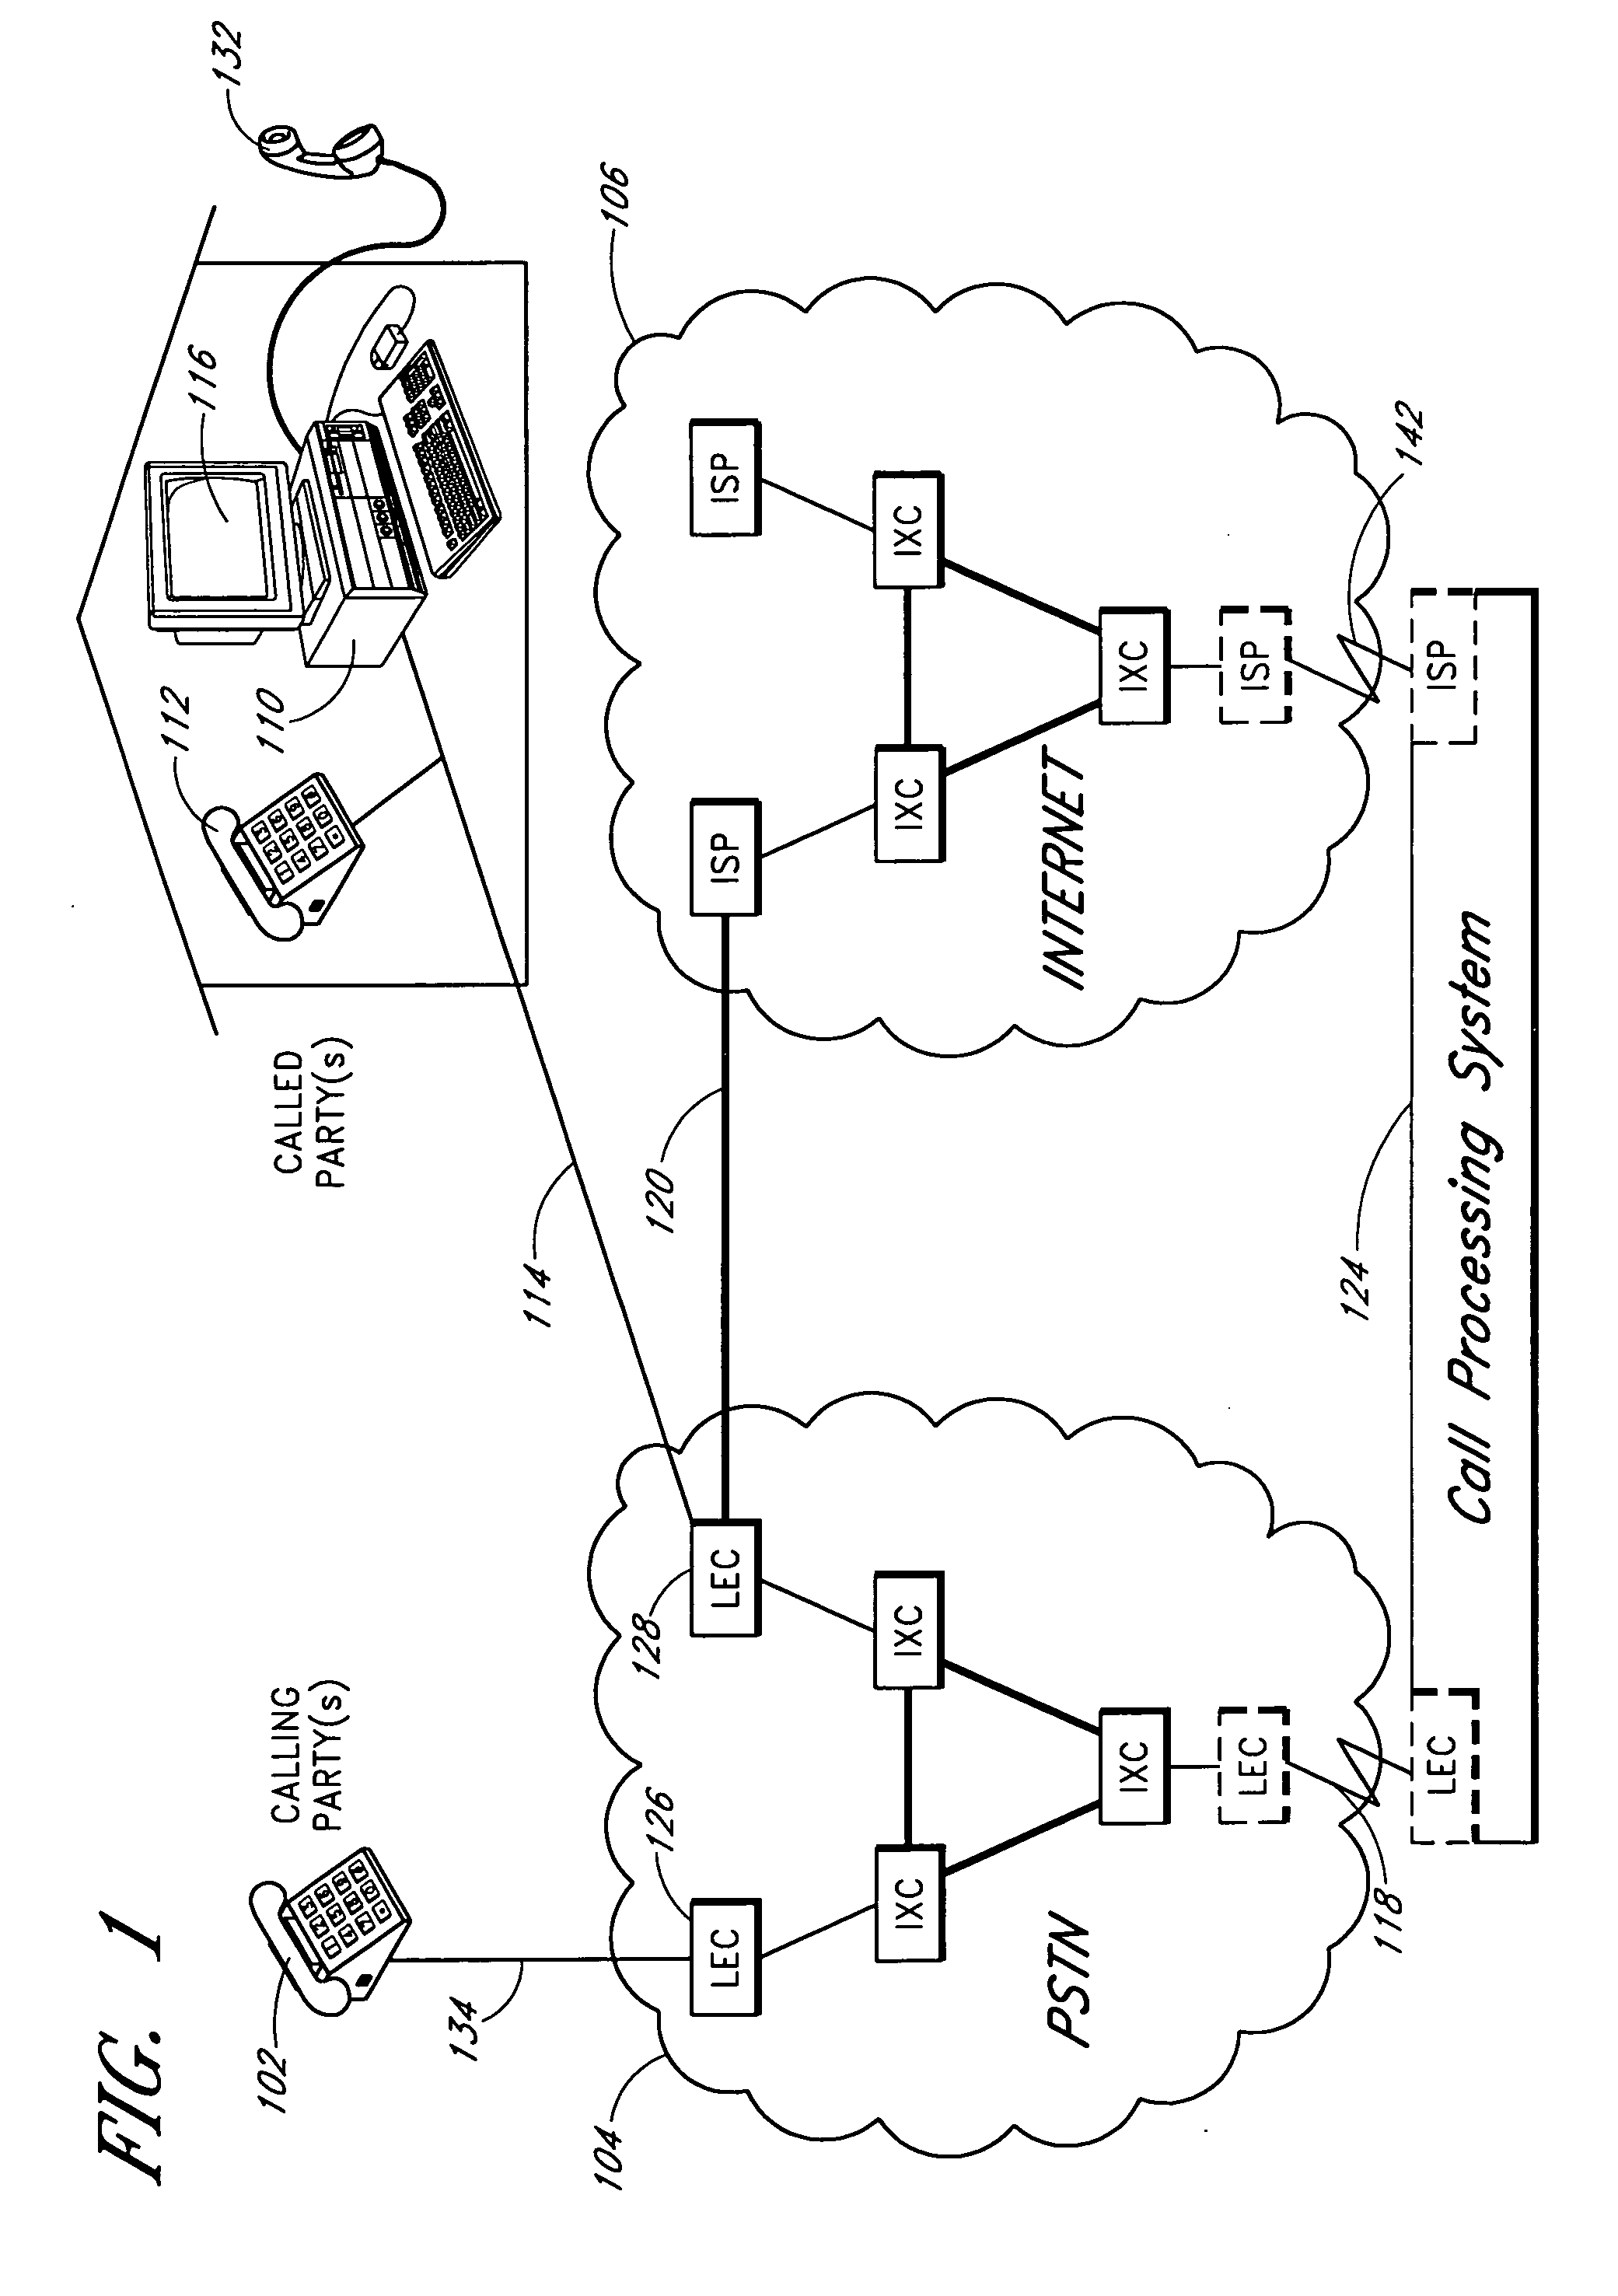 Methods and systems for telephony processing, including location based call transfers